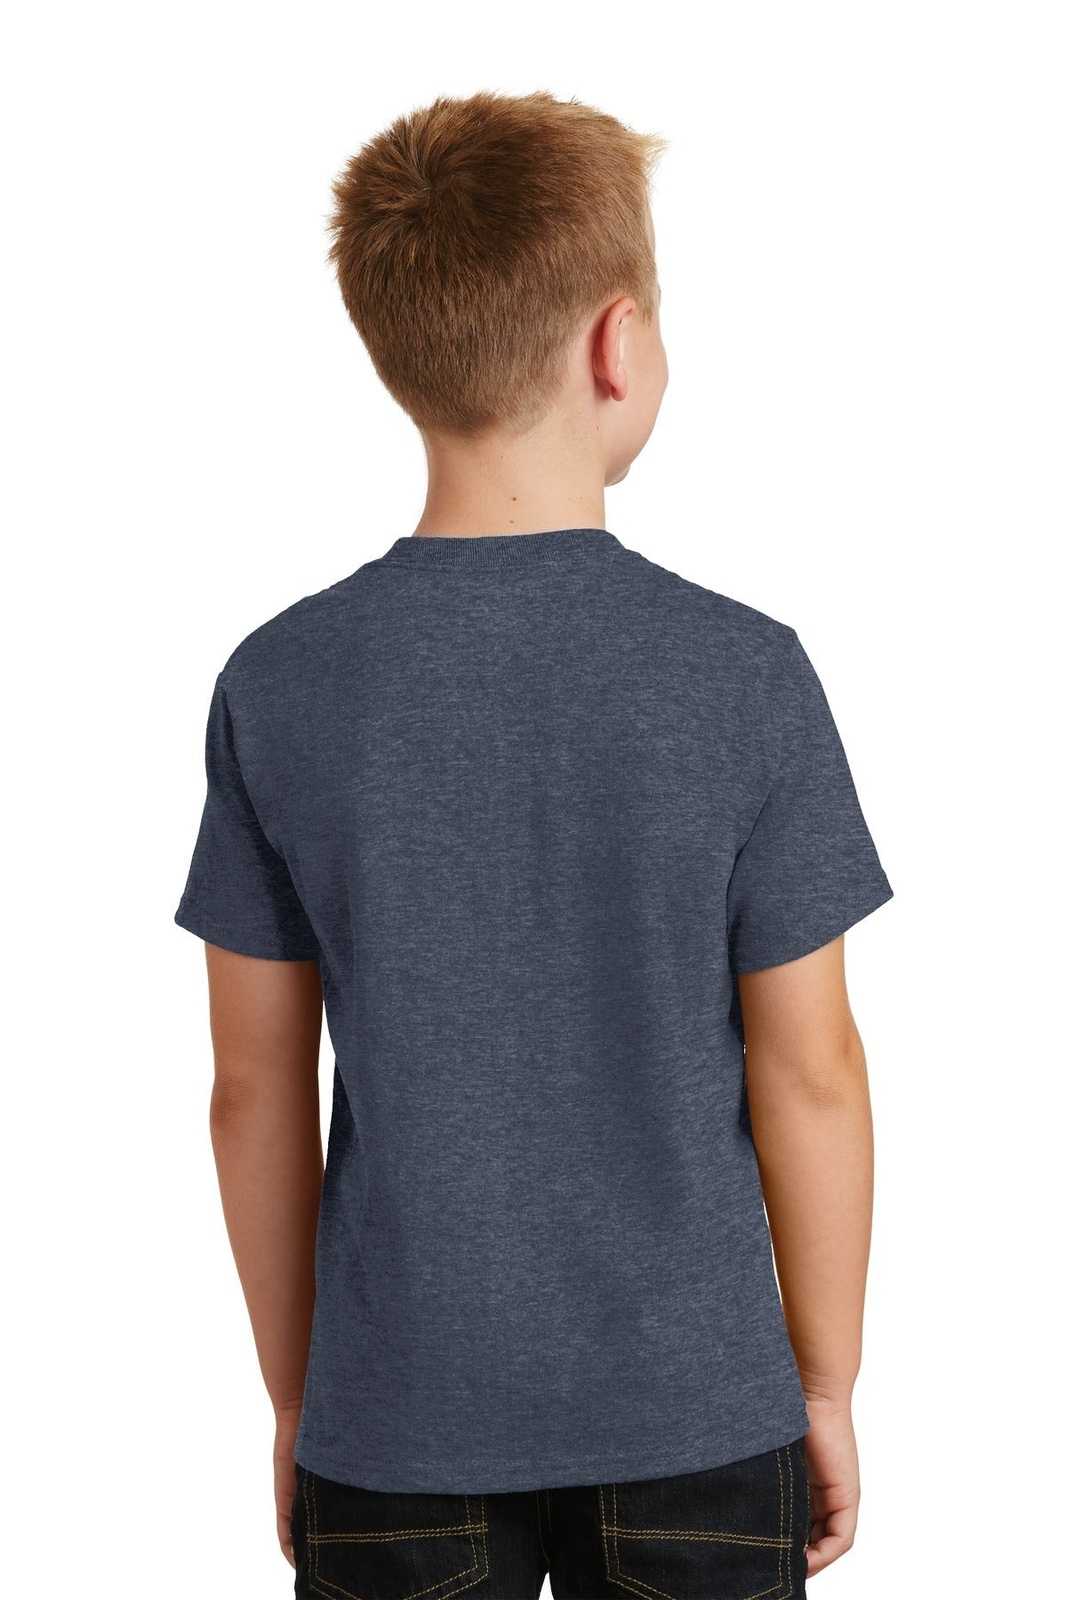 Port & Company PC54Y Youth Core Cotton Tee - Heather Navy - HIT a Double - 1